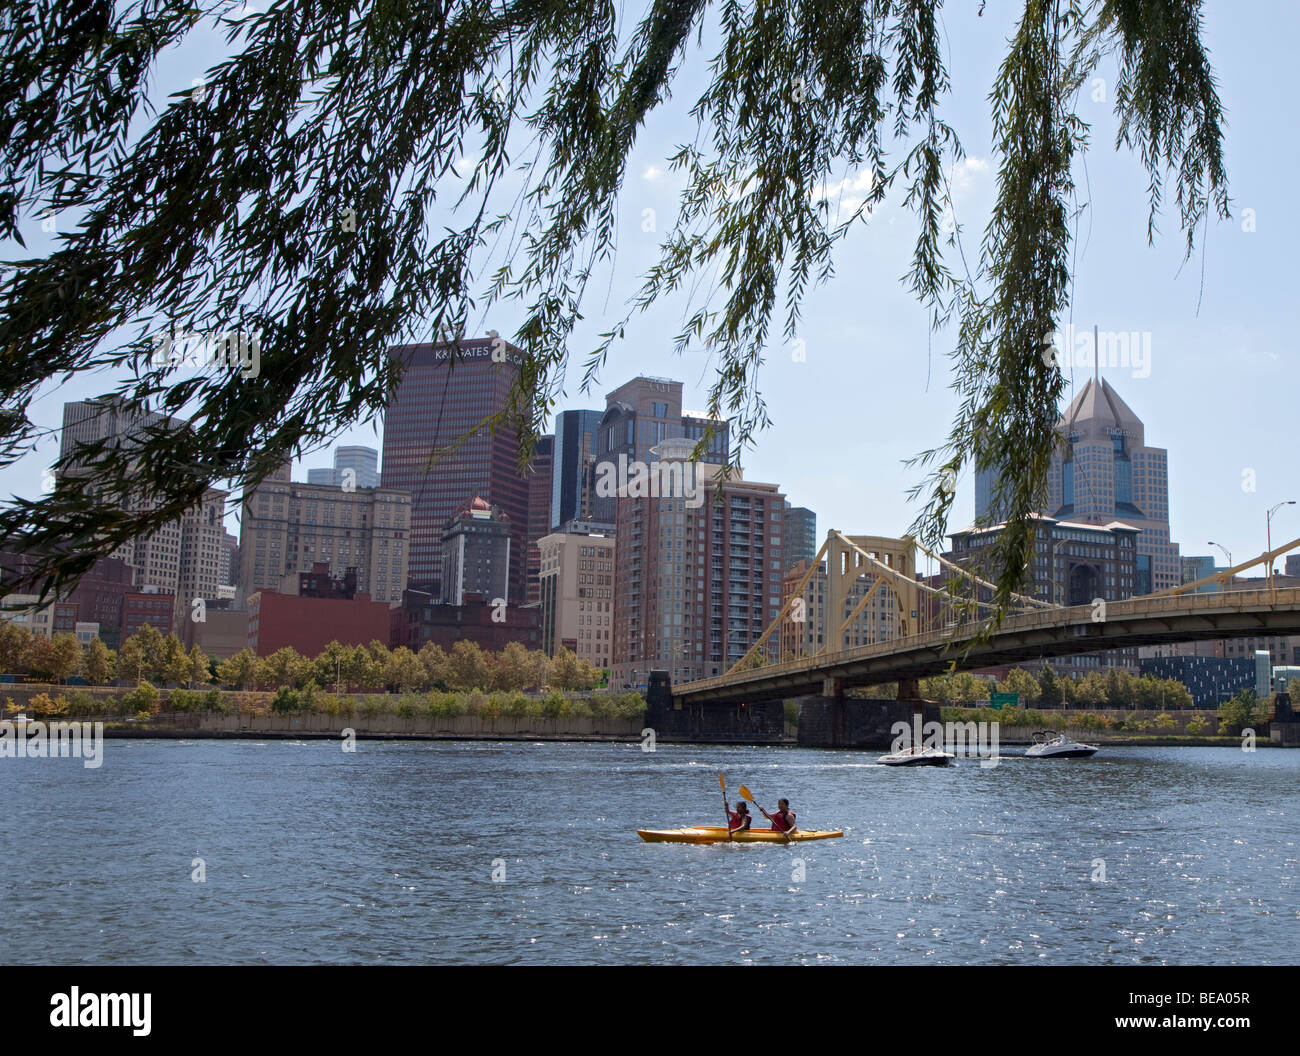 Pittsburgh, Pennsylvania - Kayakers on the Allegheny River near downtown Pittsburgh. Stock Photo